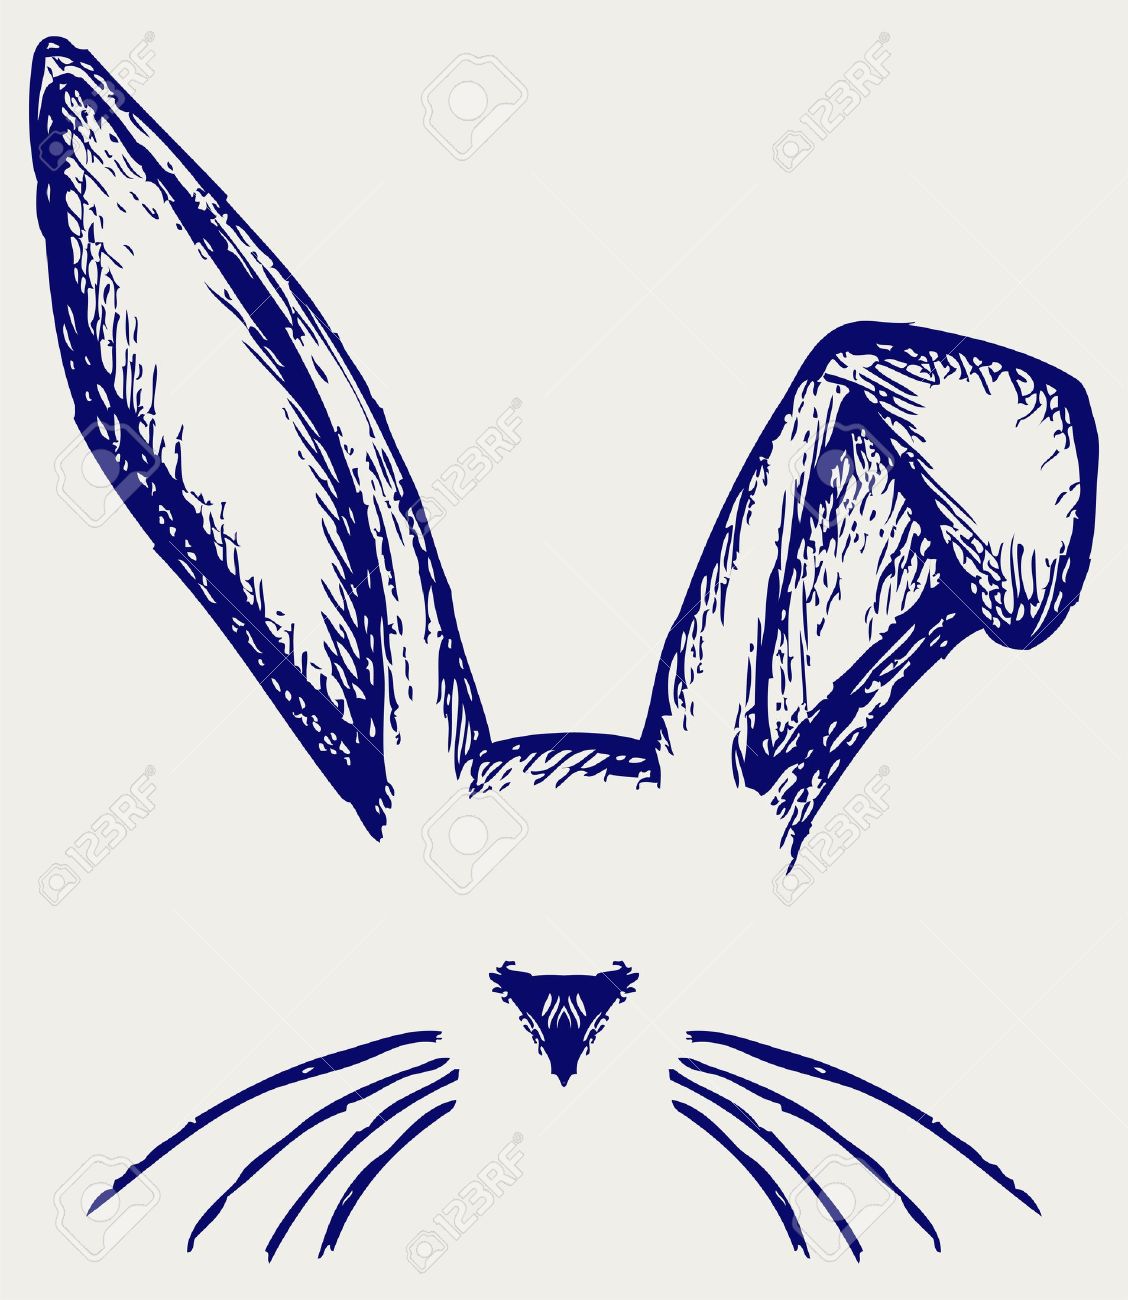 Easter bunny ears. Doodle style Stock Vector - 19483598